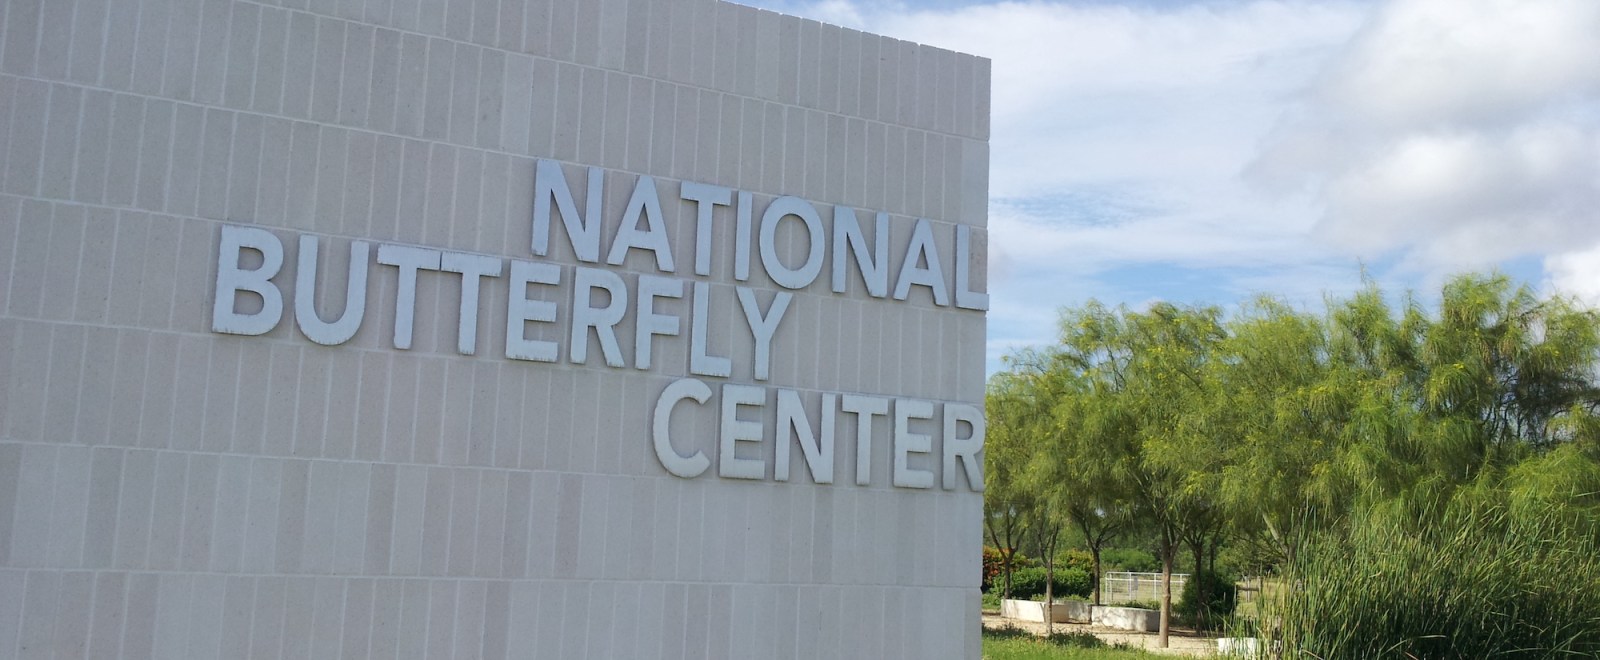 National Butterfly Center in Texas